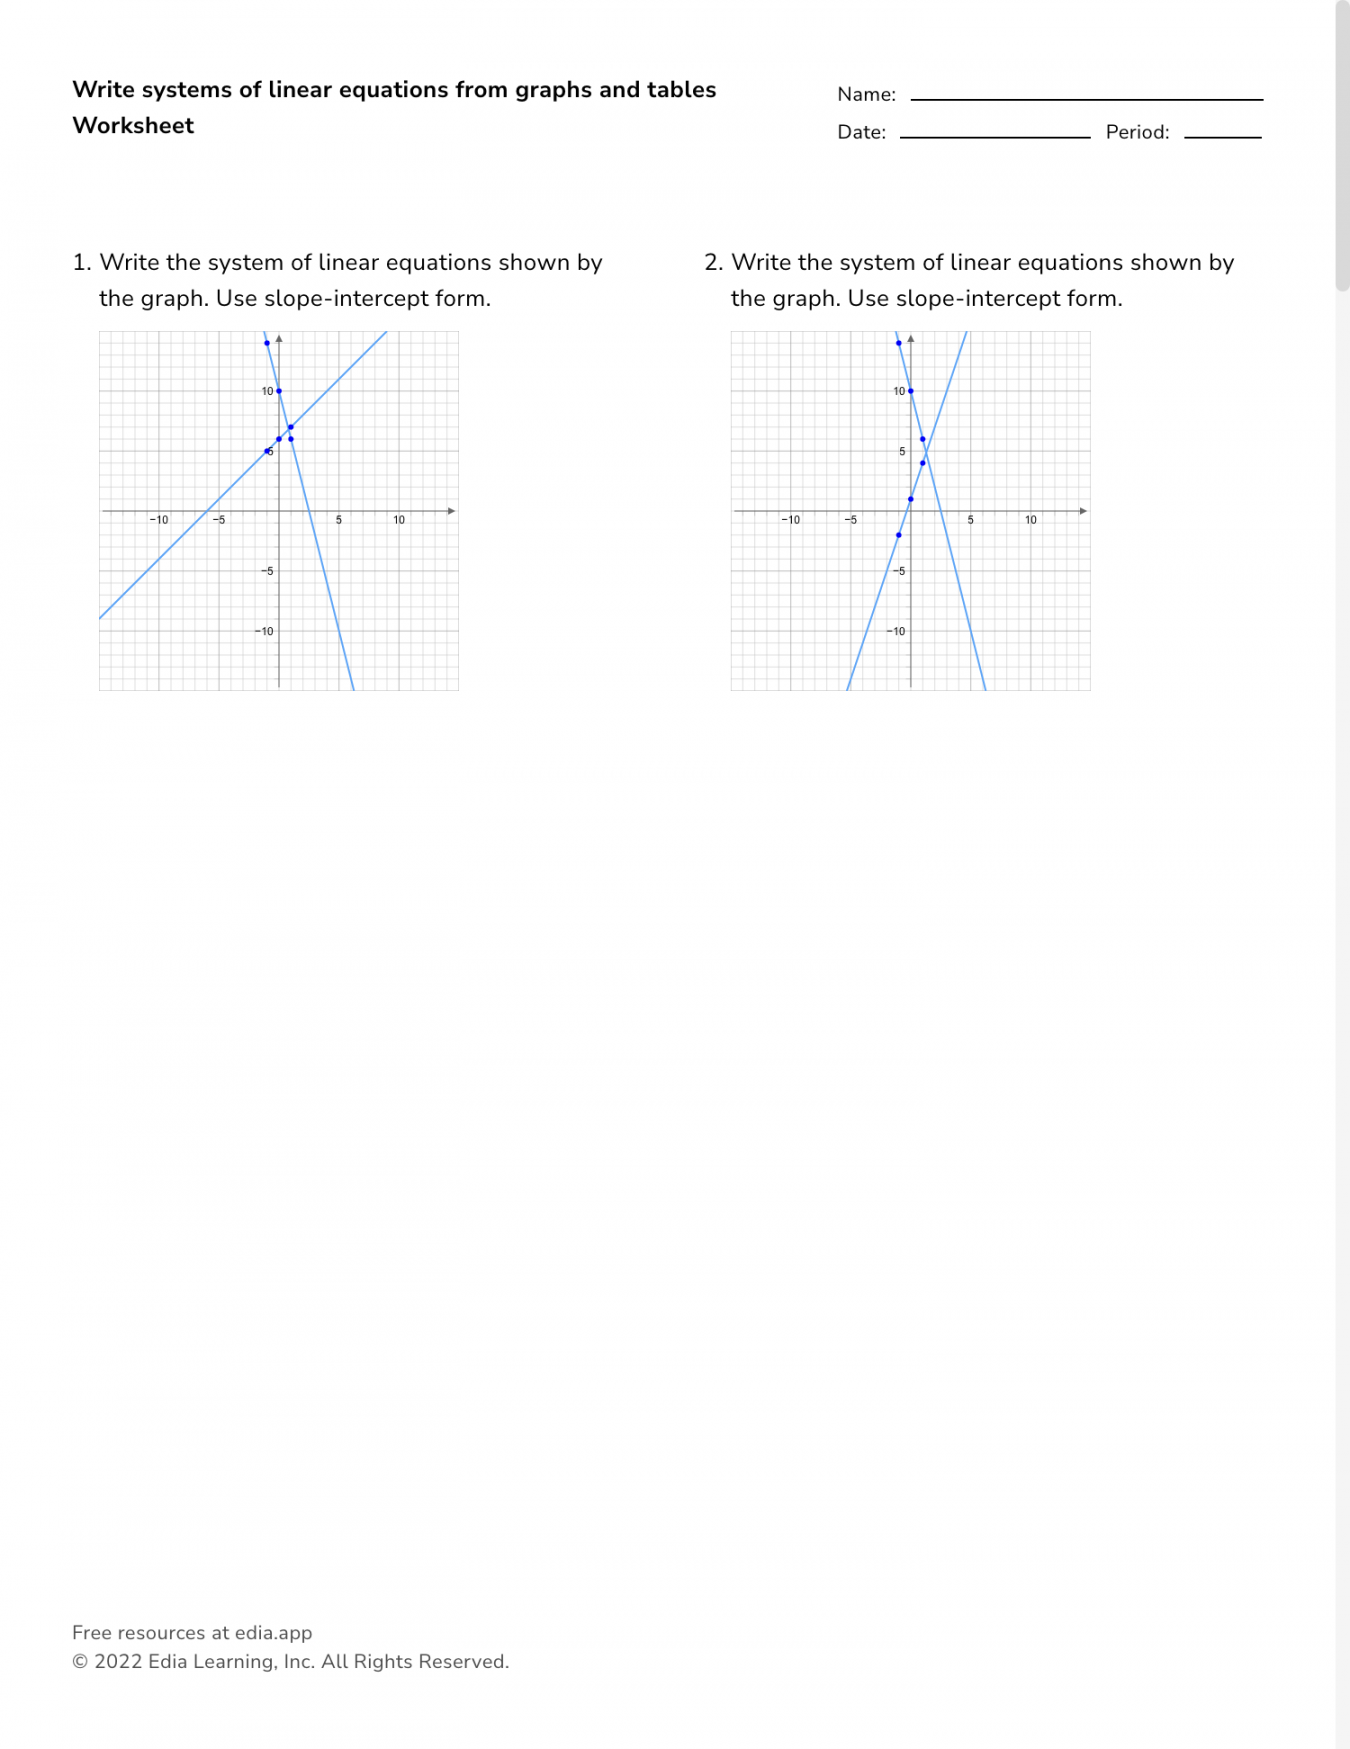 Write Systems Of Linear Equations From Graphs And Tables - Worksheet